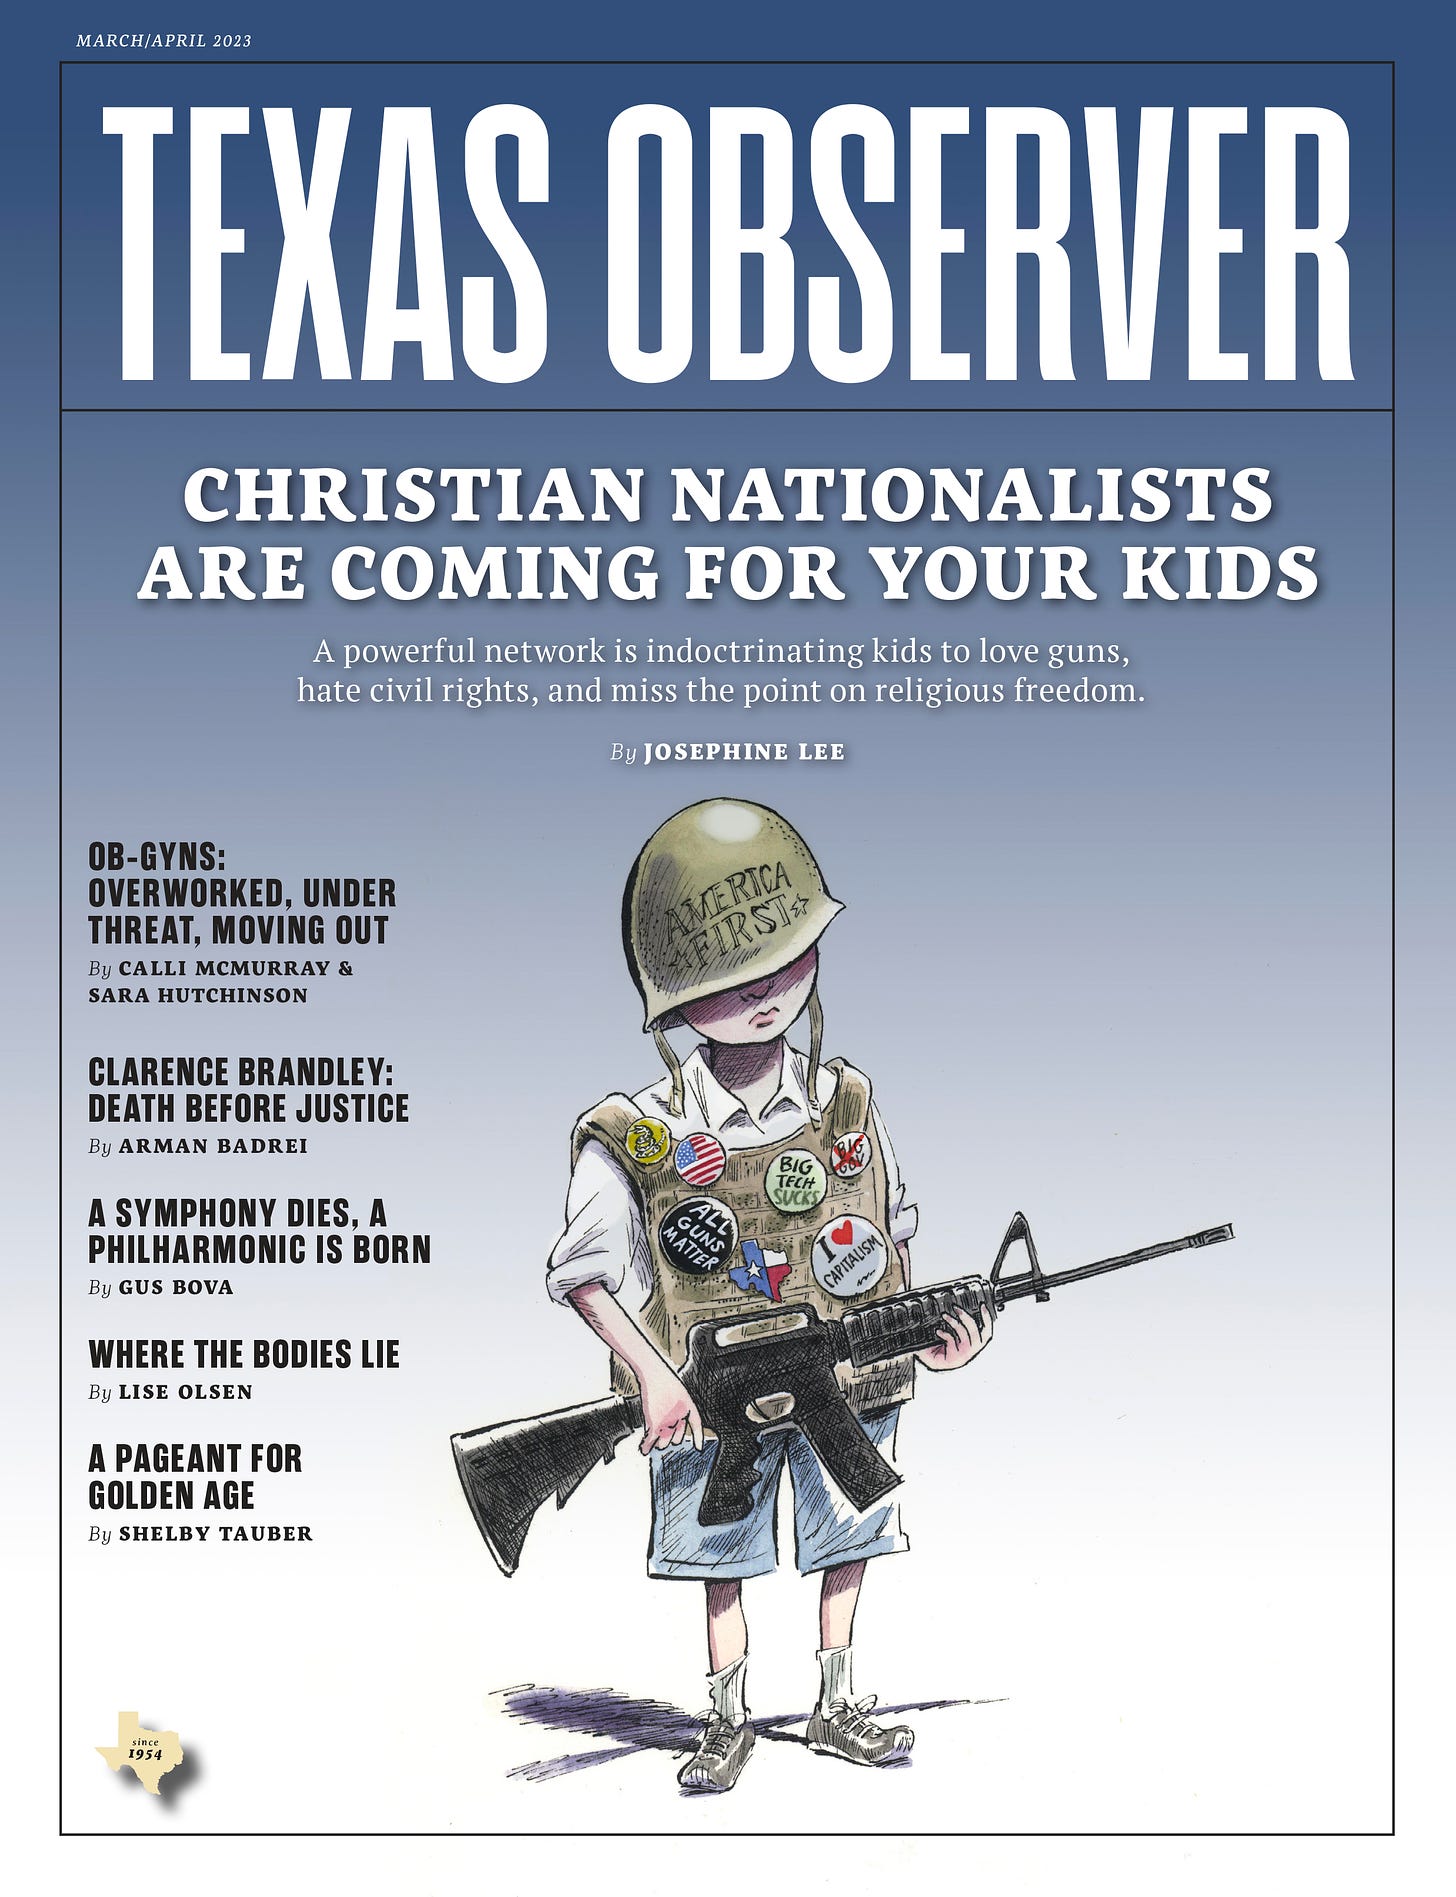 The Texas Observer: Investigating Texas Since 1954